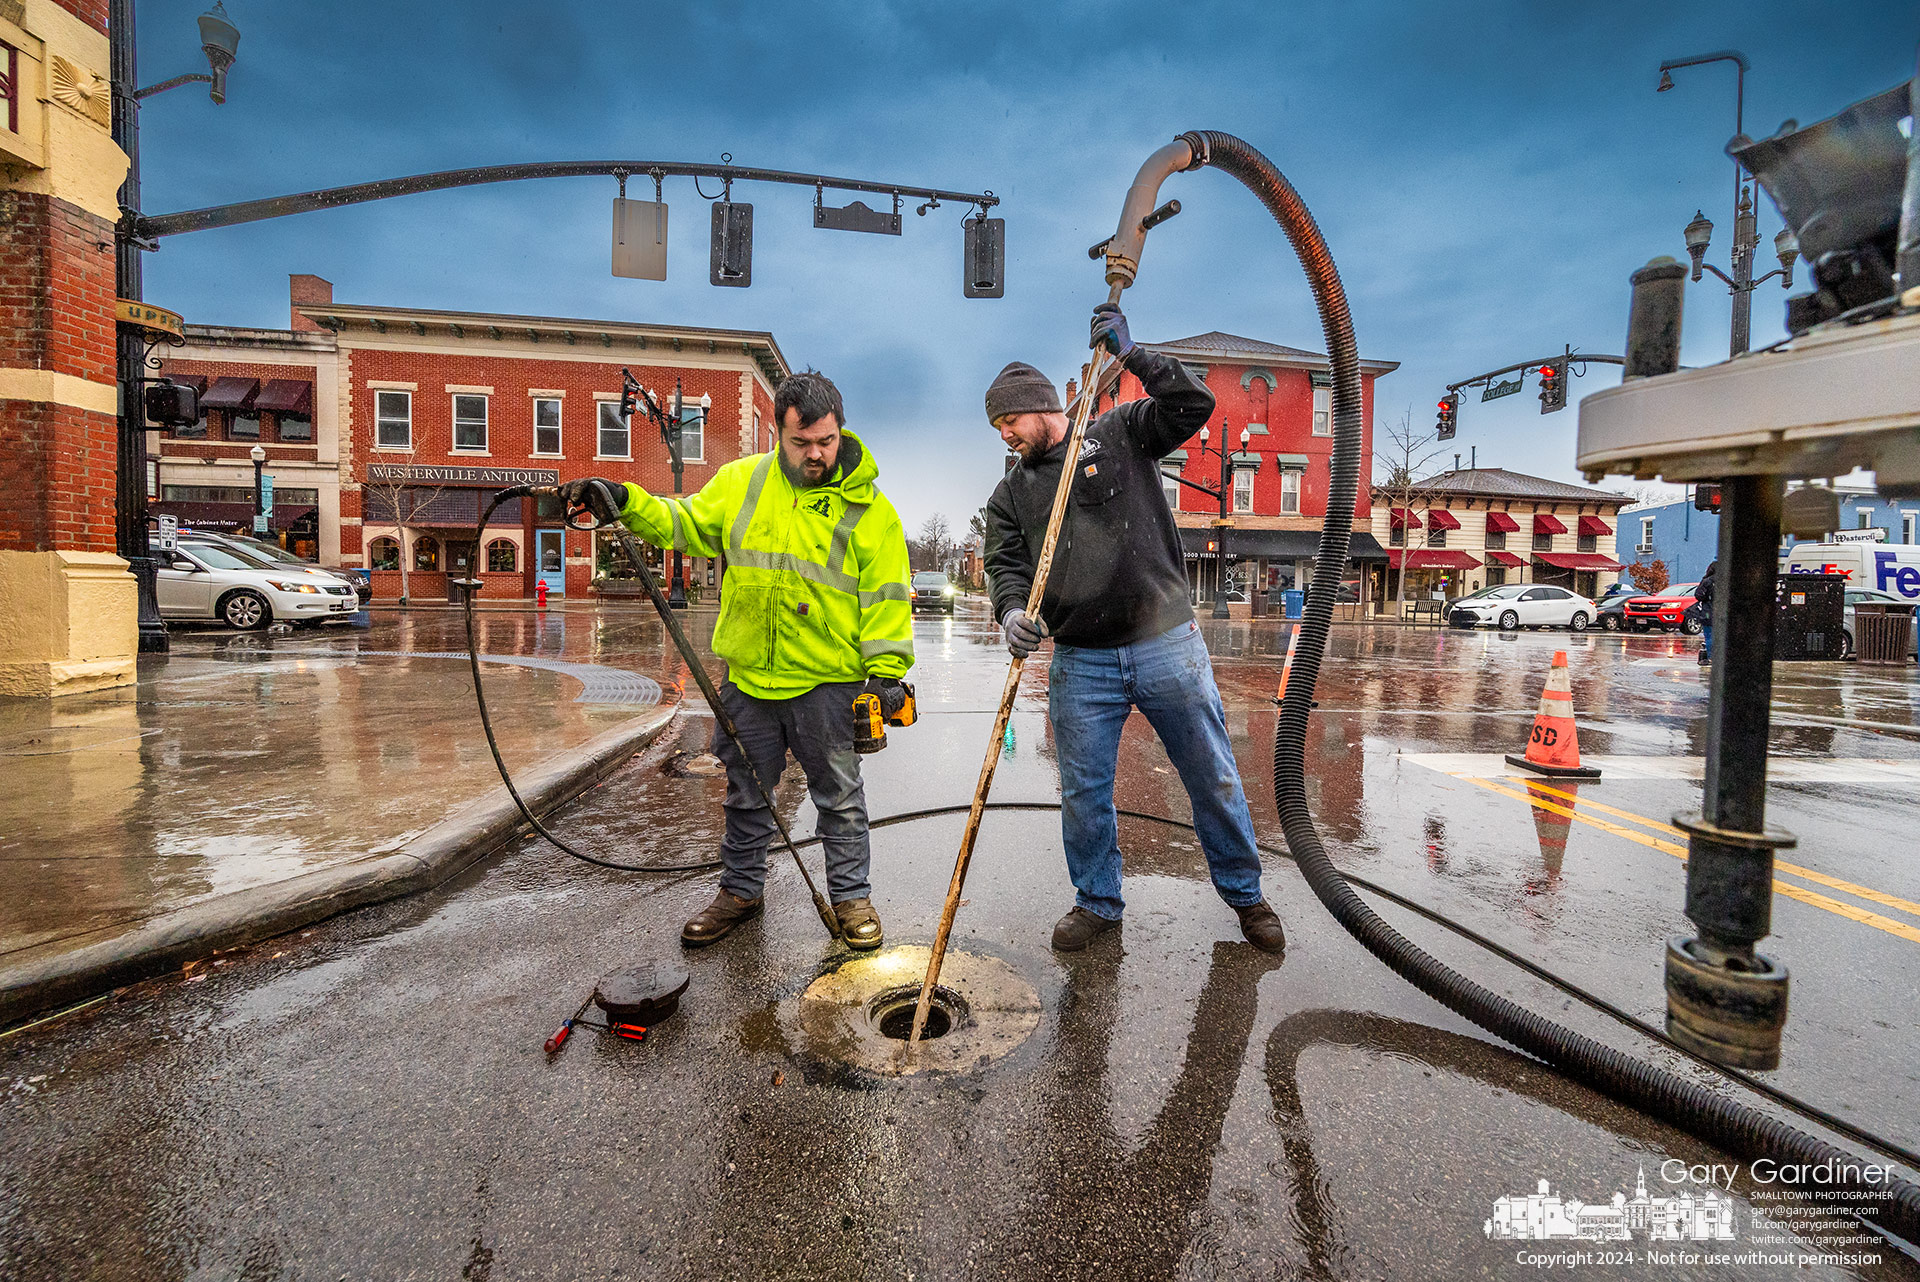 City workers stand in the rain as they power wash and vacuum clear a water valve on West College at State Street as part of the regular cleanup of service valves in city streets. My Final Photo for January 12, 2024.